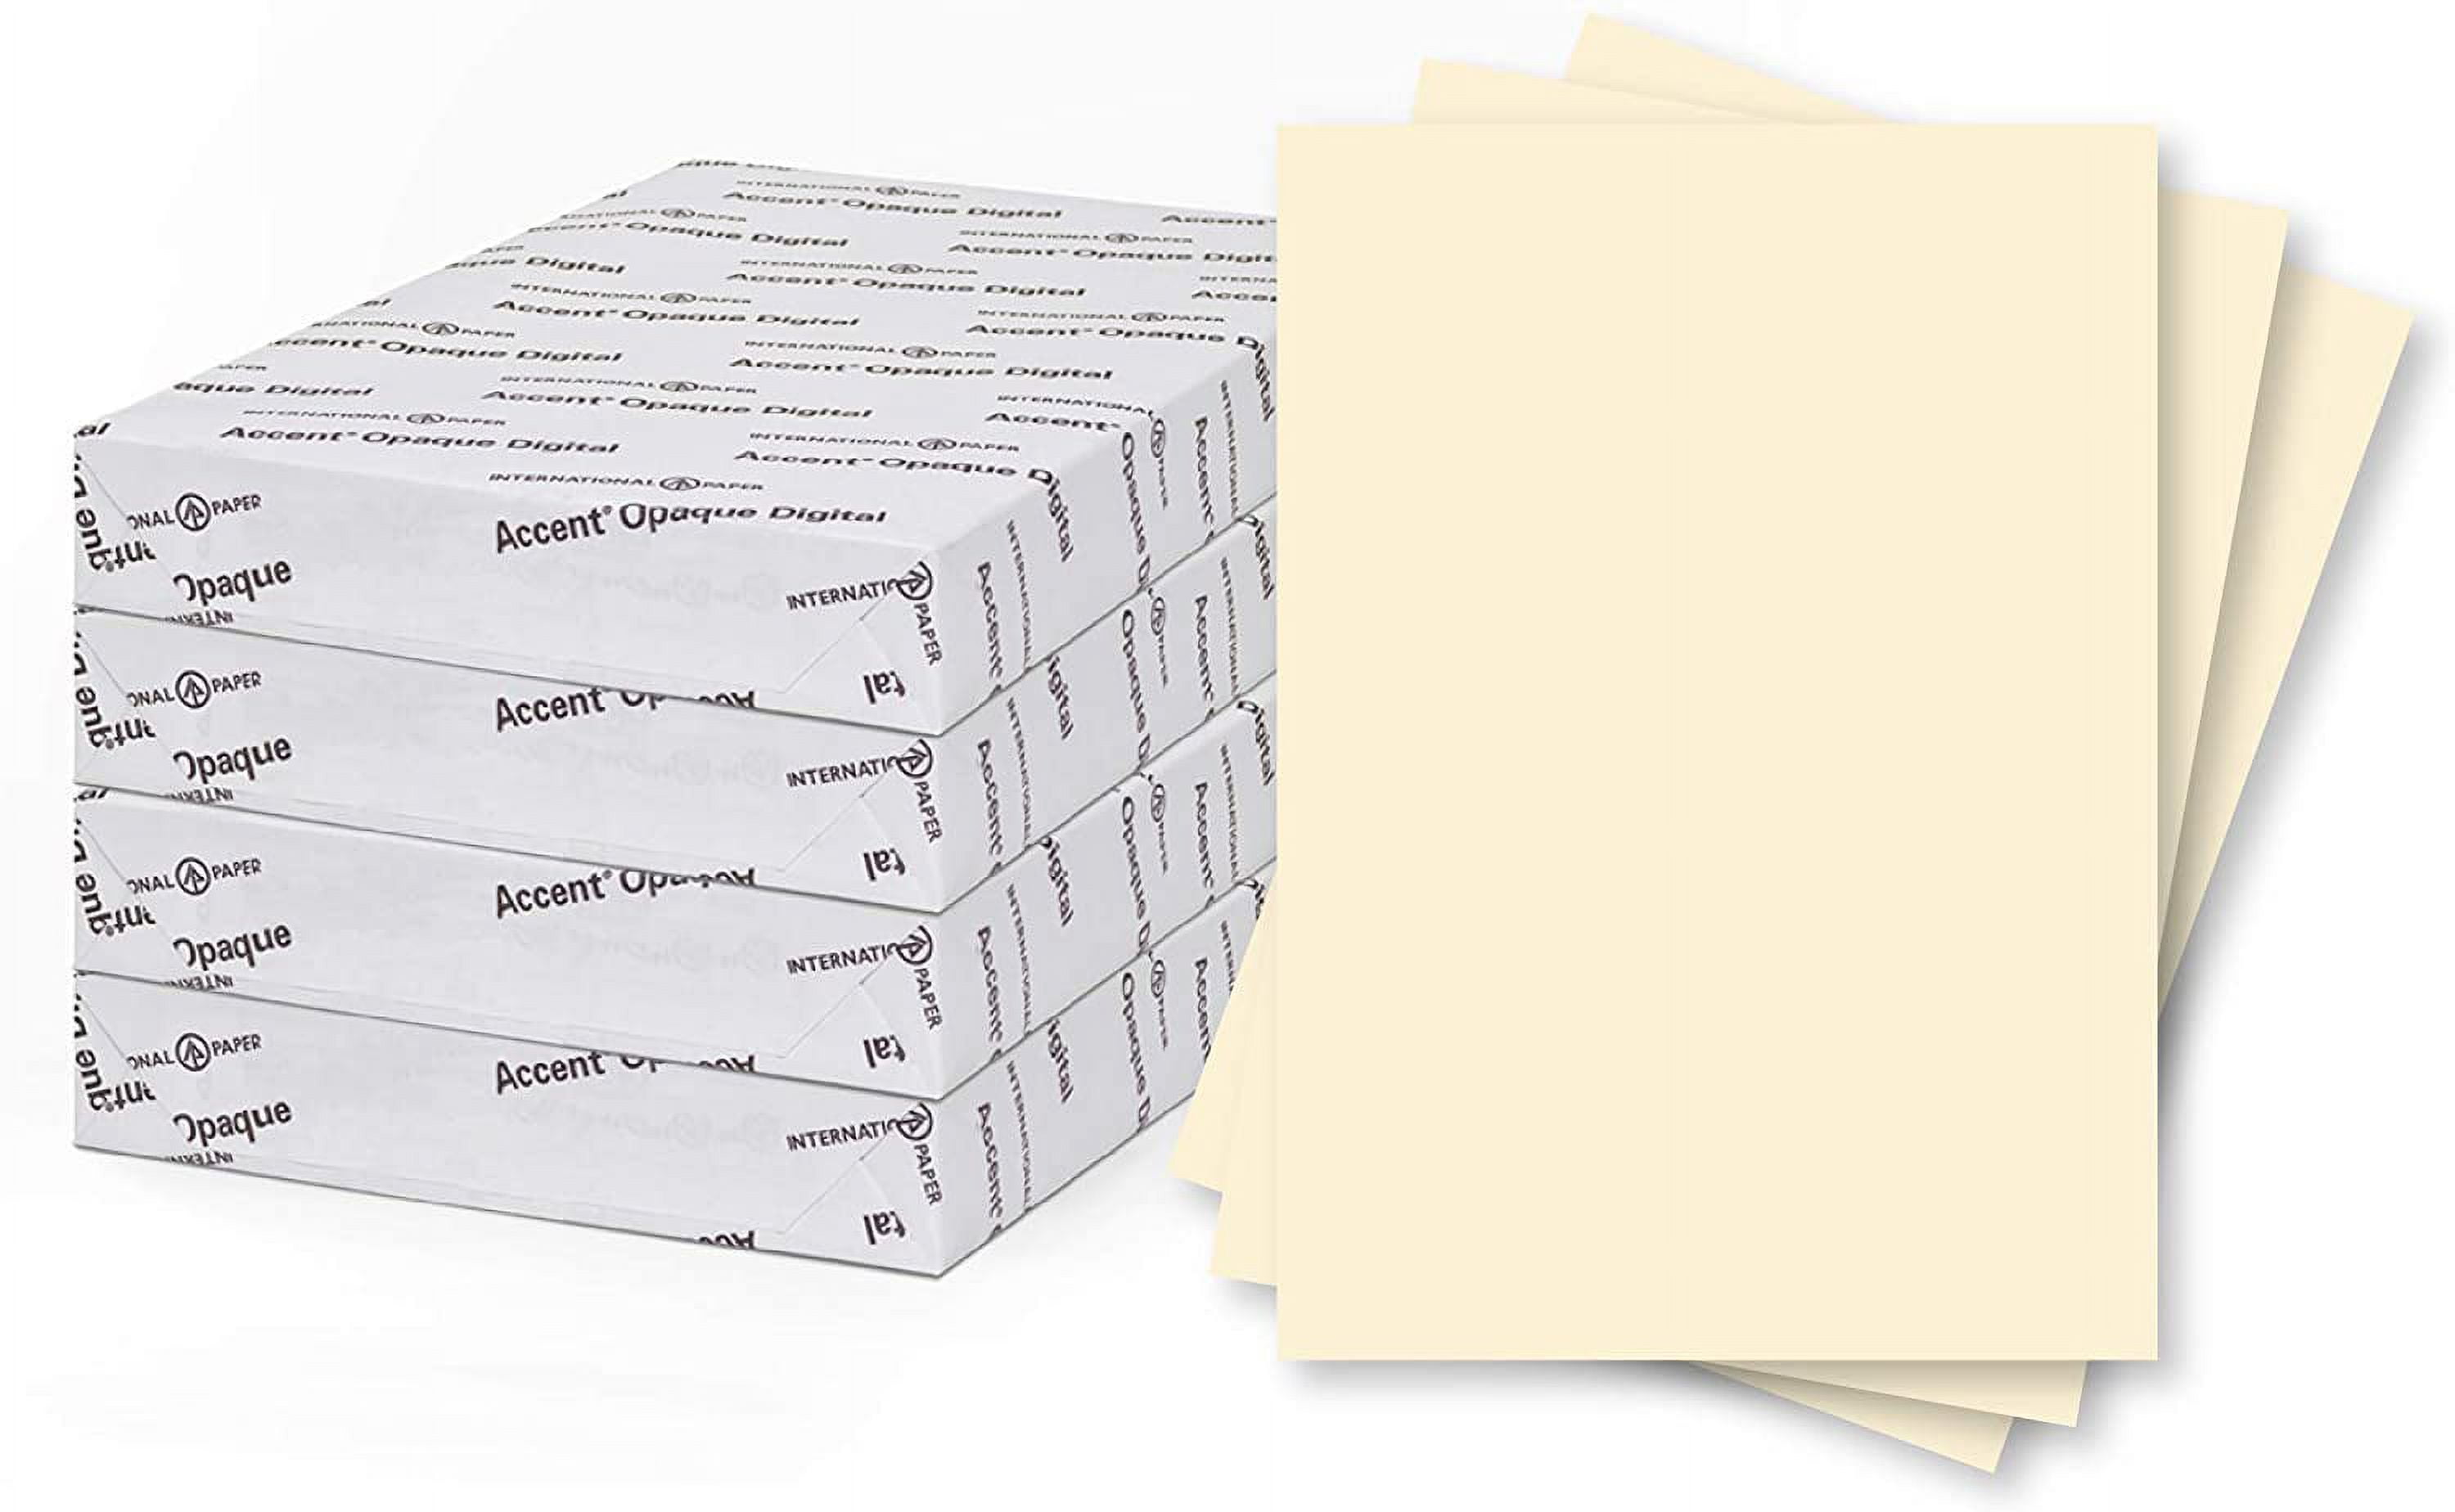 Accent Opaque Cream Colored Cardstock Paper, 100lb Cover, 271 gsm, 19x13 Card Stock, 4 Ream Case / 700 Sheets, Heavy Cardstock with Super Smooth